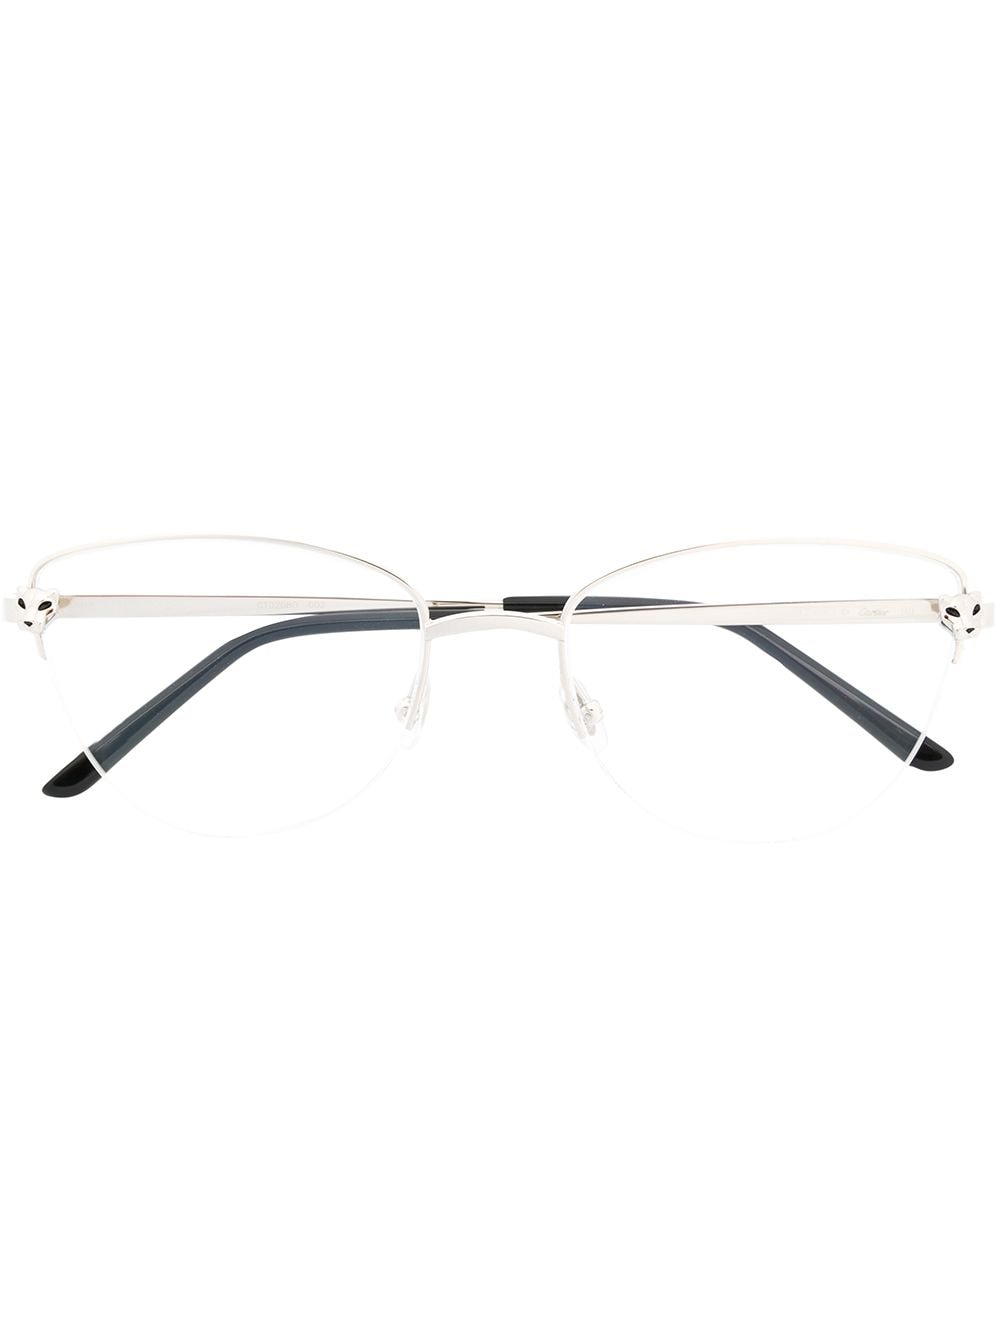 CARTIER PANTHERE SQUARE FRAME OPTICAL GLASSES